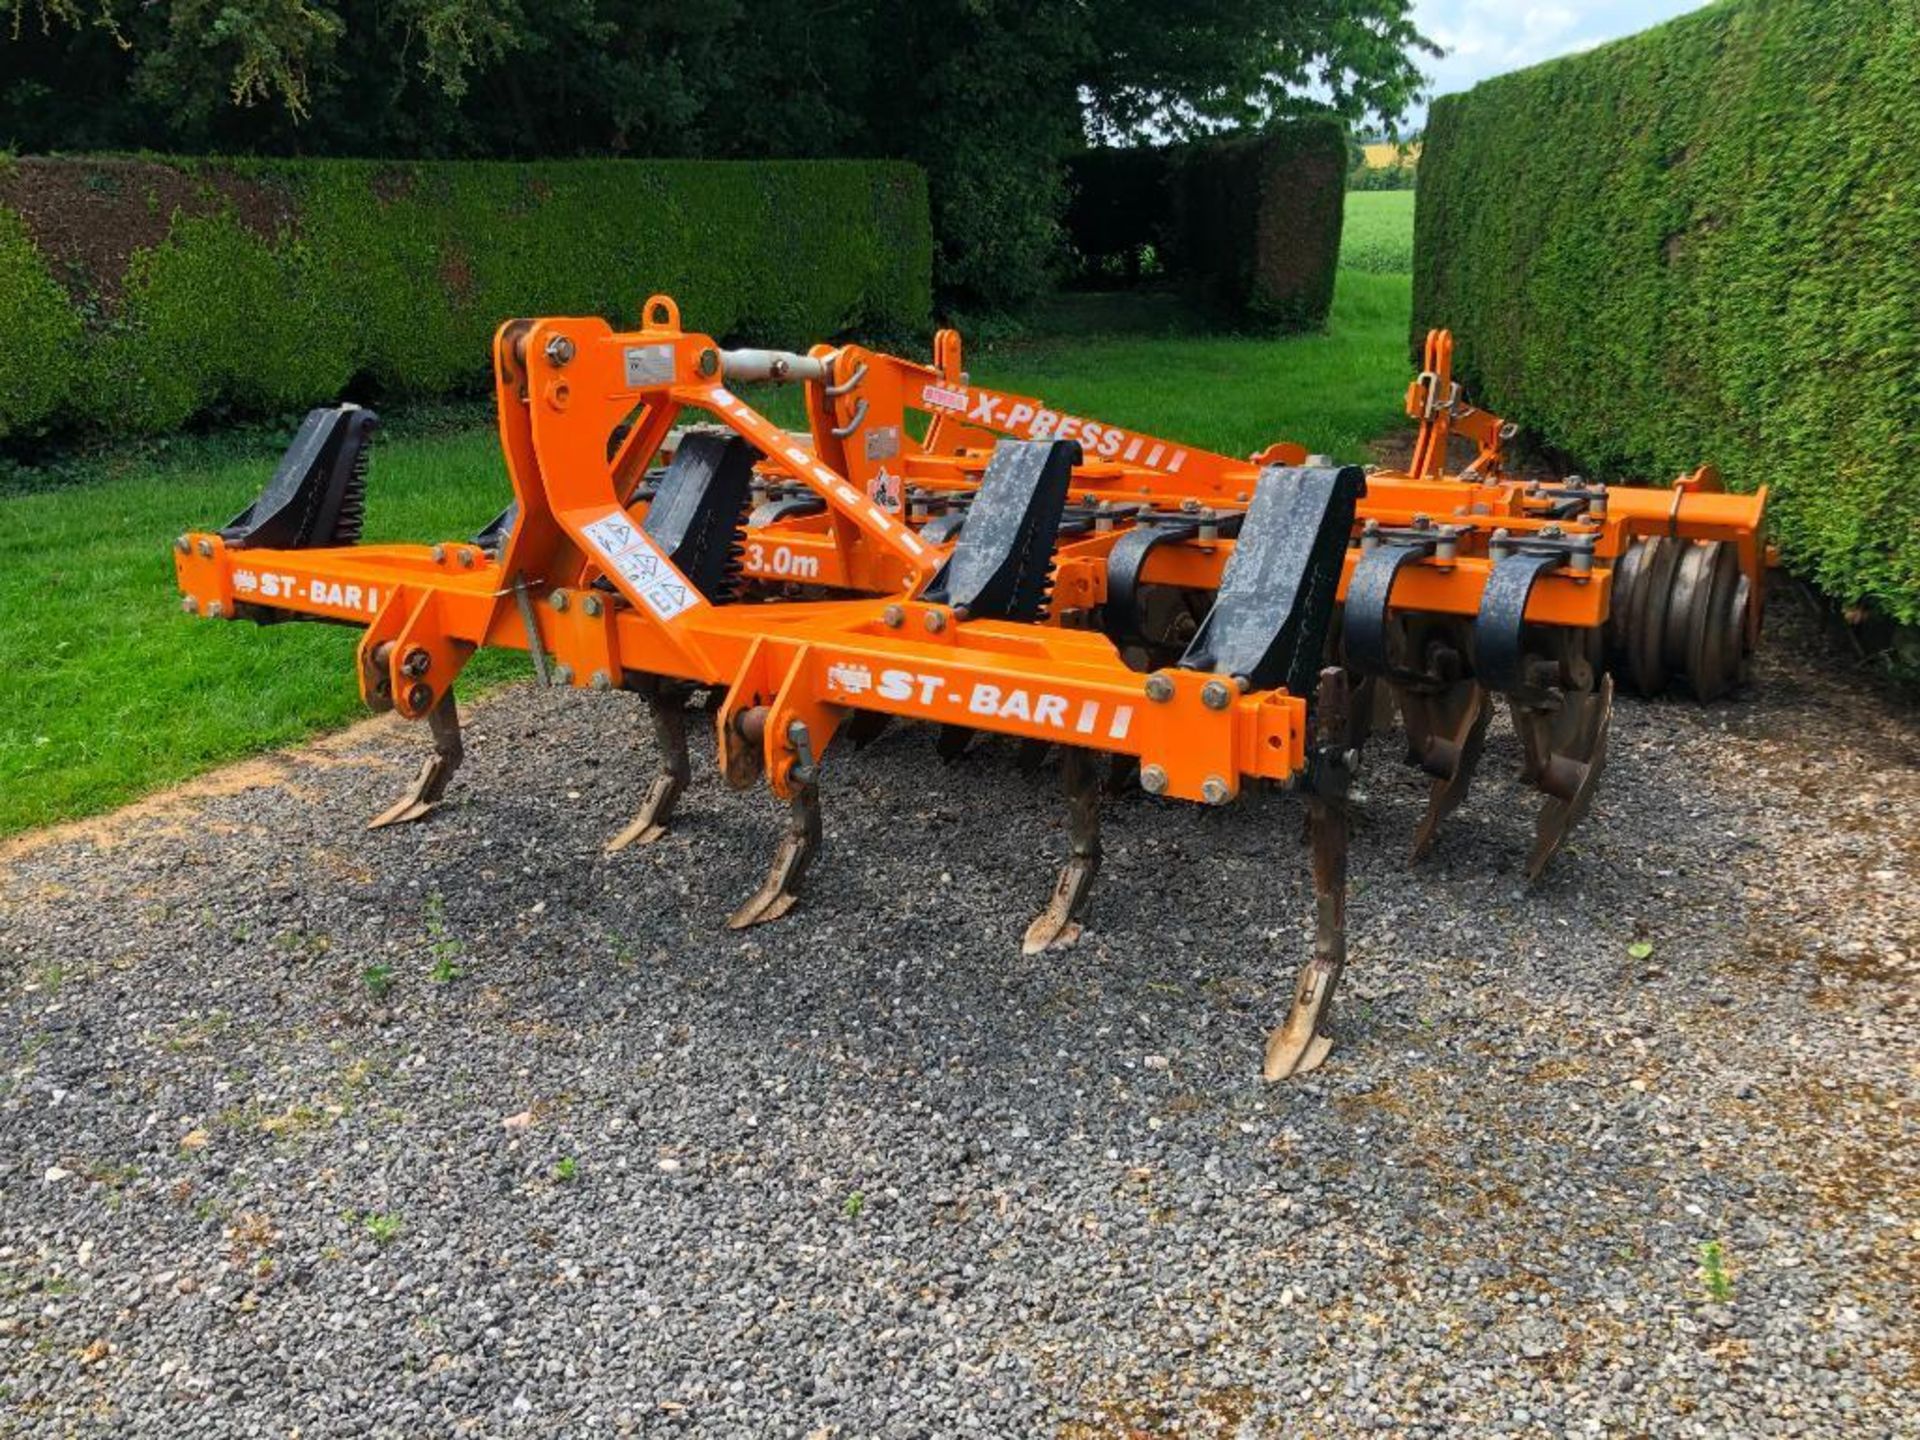 2008 Simba X-Press 3m with Simba ST bar, 2 rows of discs and DD light packer. X-Press Serial No: 180 - Image 11 of 15